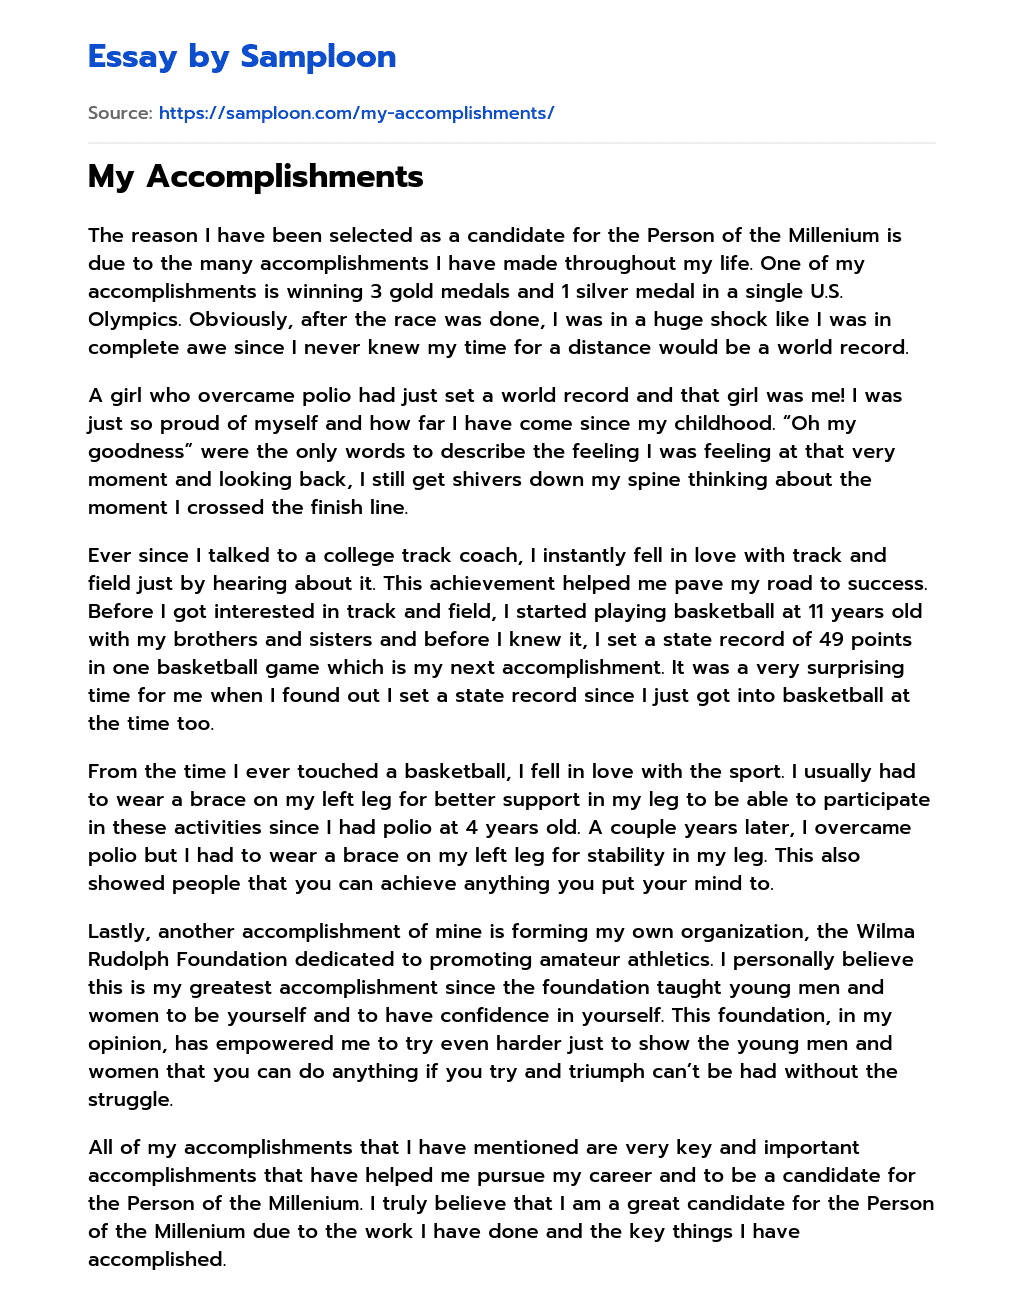 how to write an essay about your accomplishments